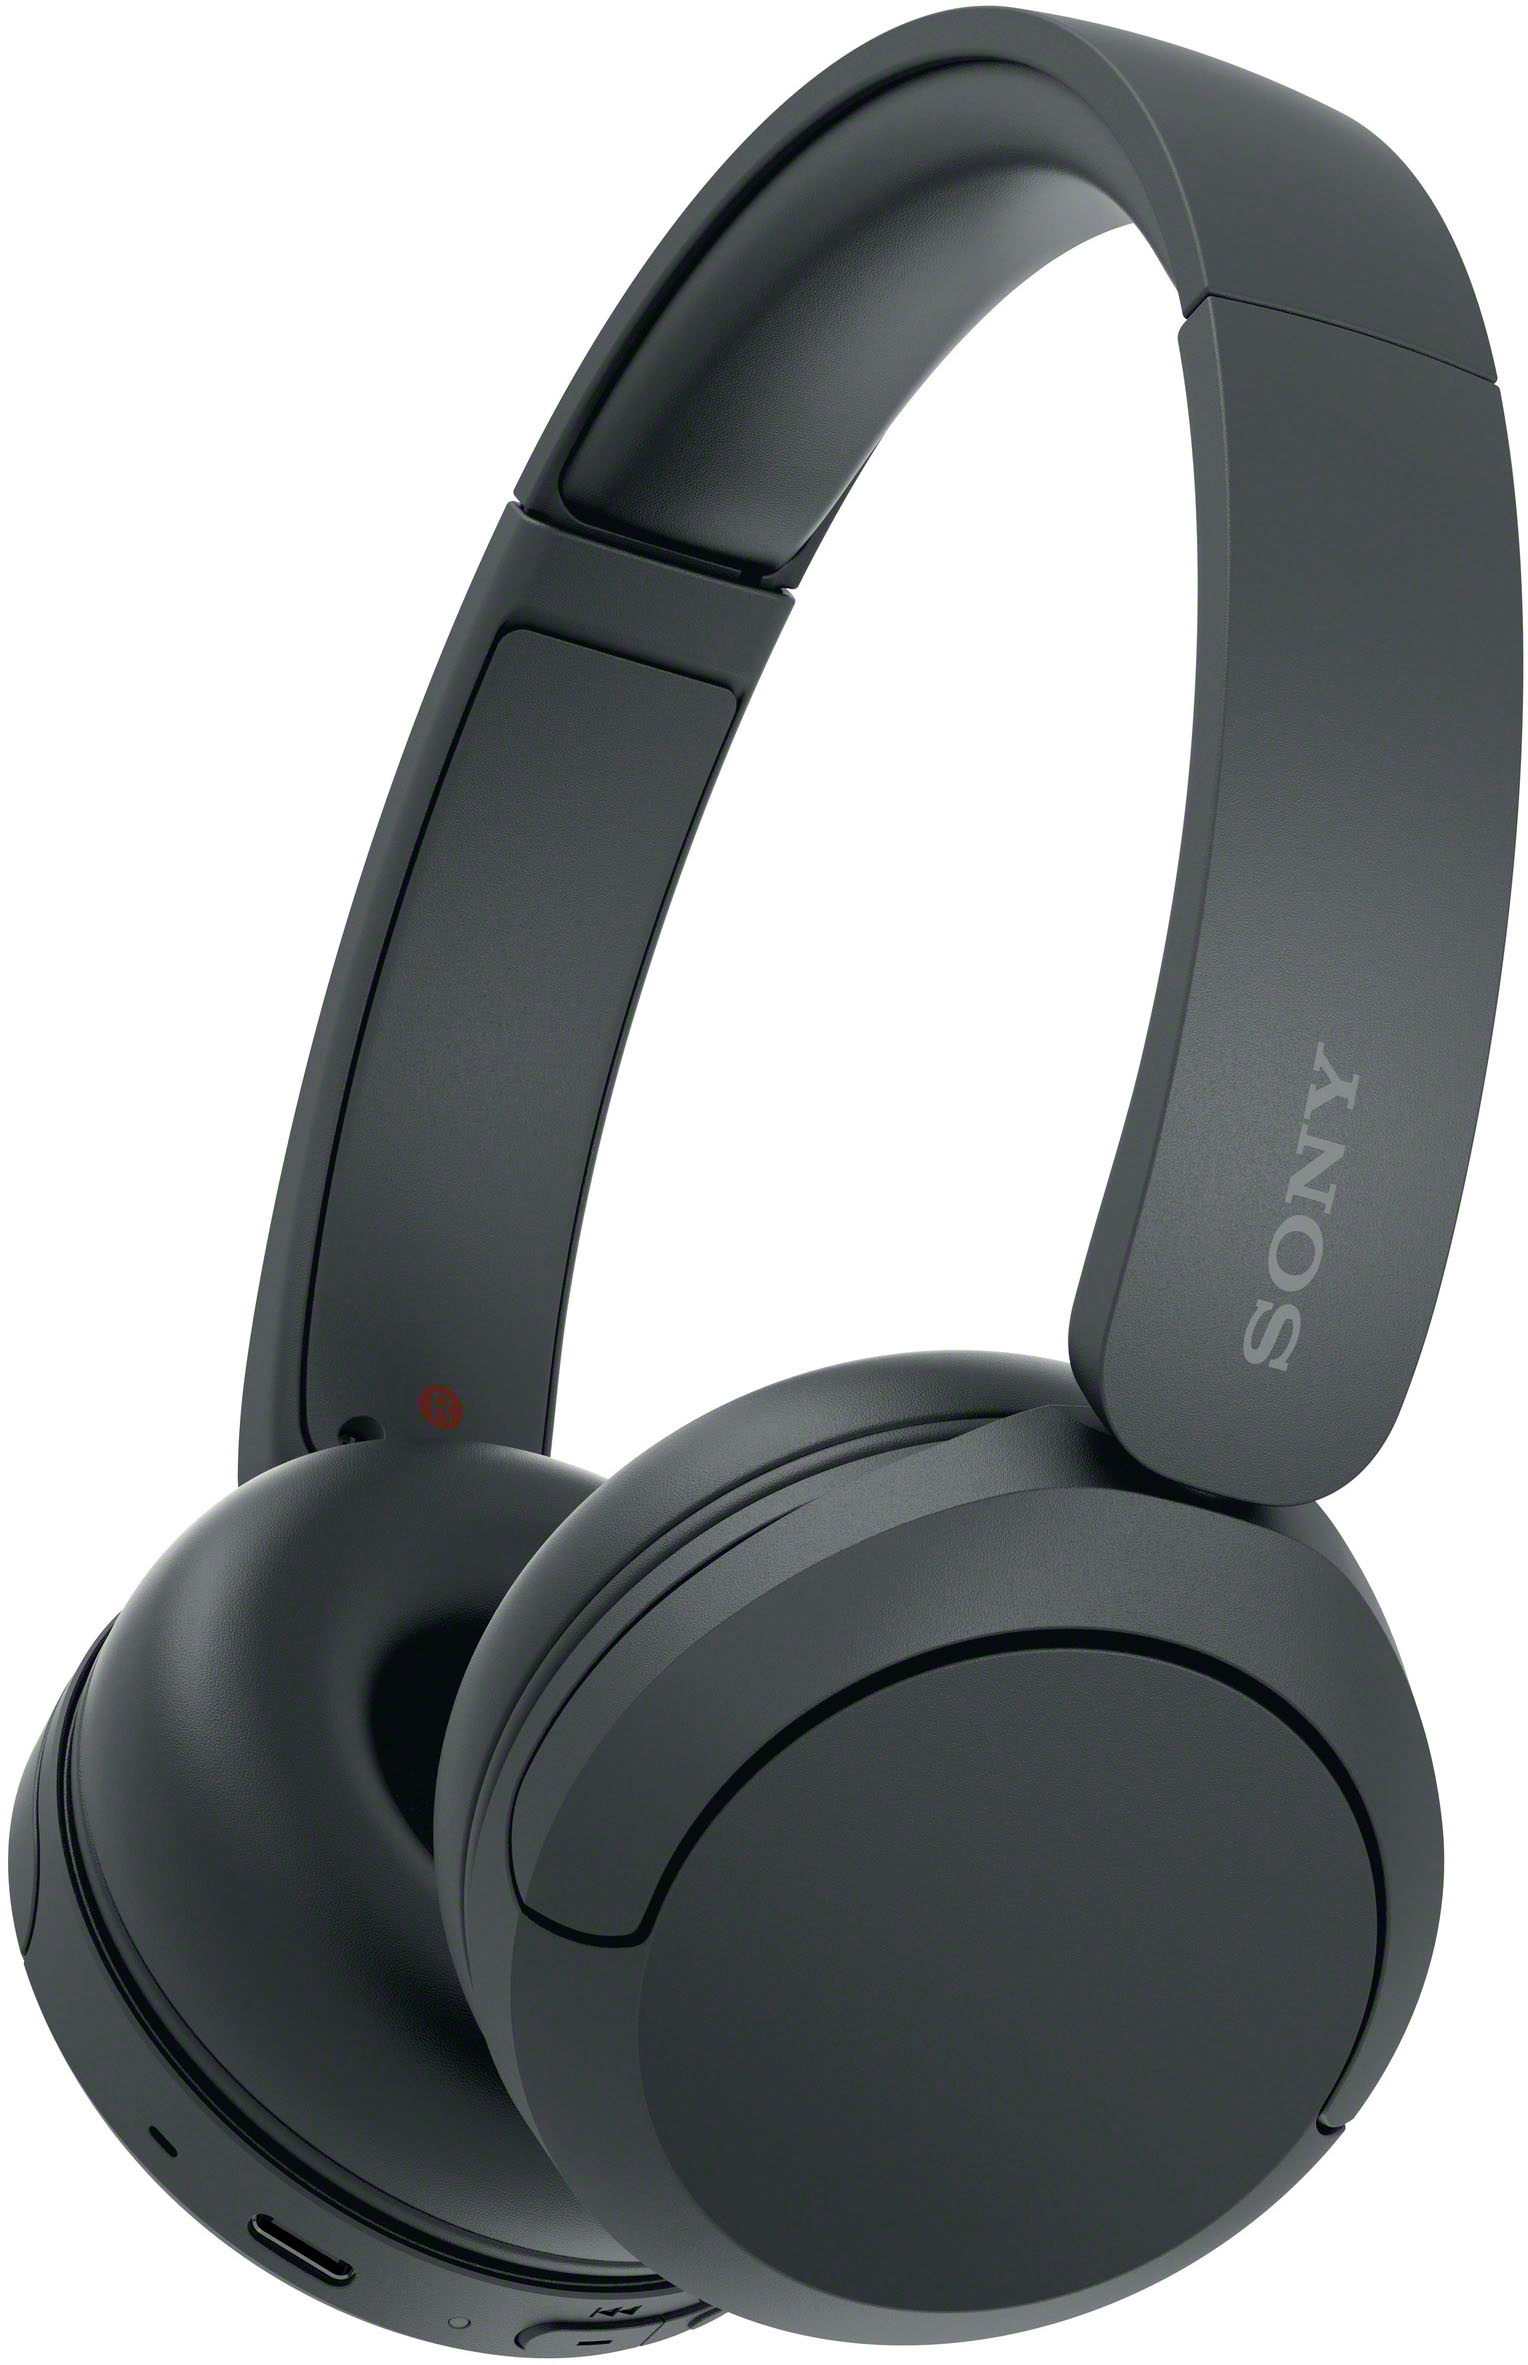 Krijt mate Catastrofaal Sony WH-CH520 Wireless Headphone with Microphone Black WHCH520/B - Best Buy